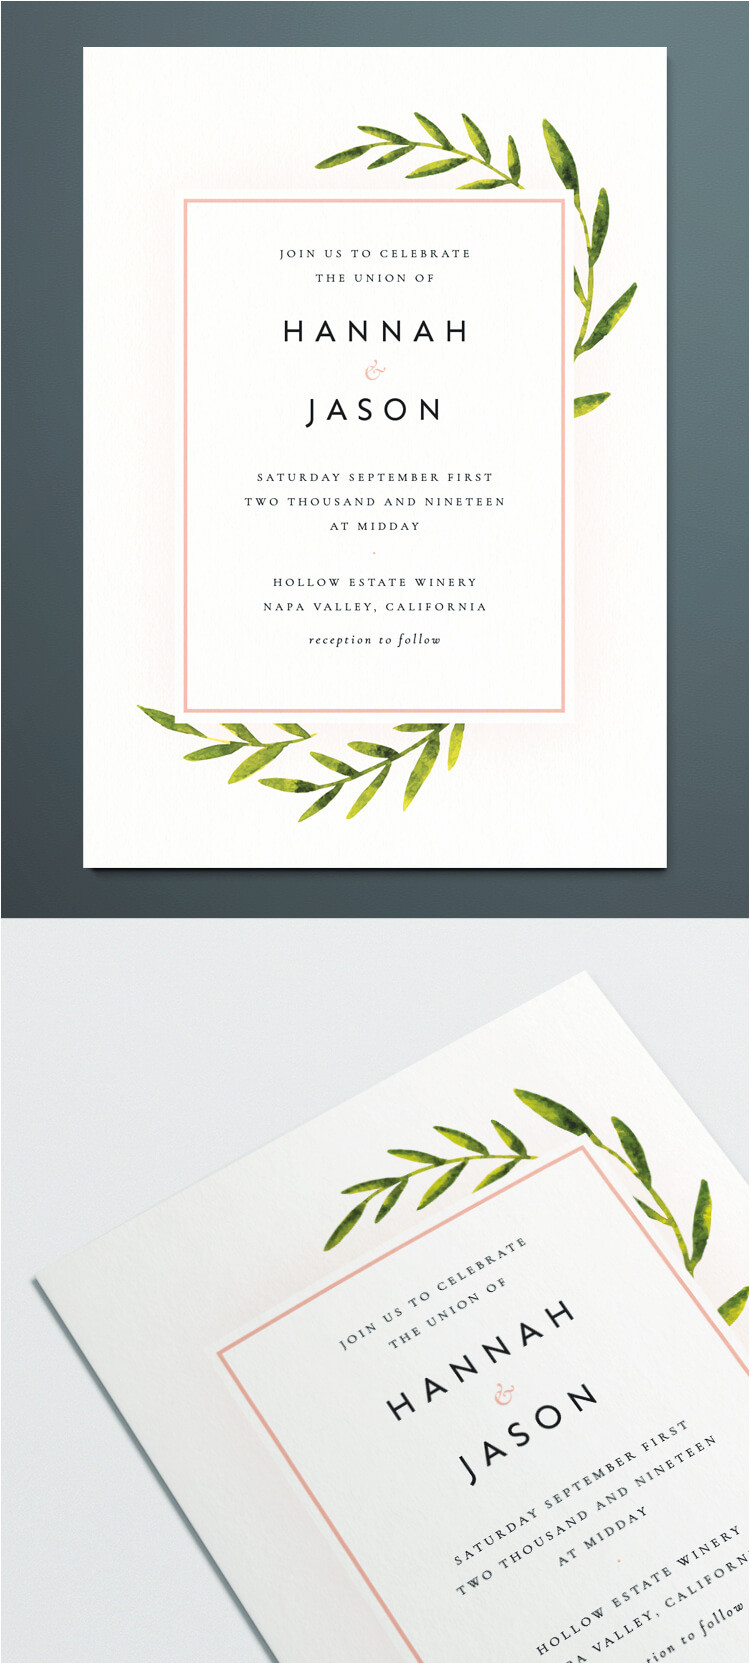 Indesign Wedding Invitation Template Free Vintage Business Card Template for Indesign Free Download